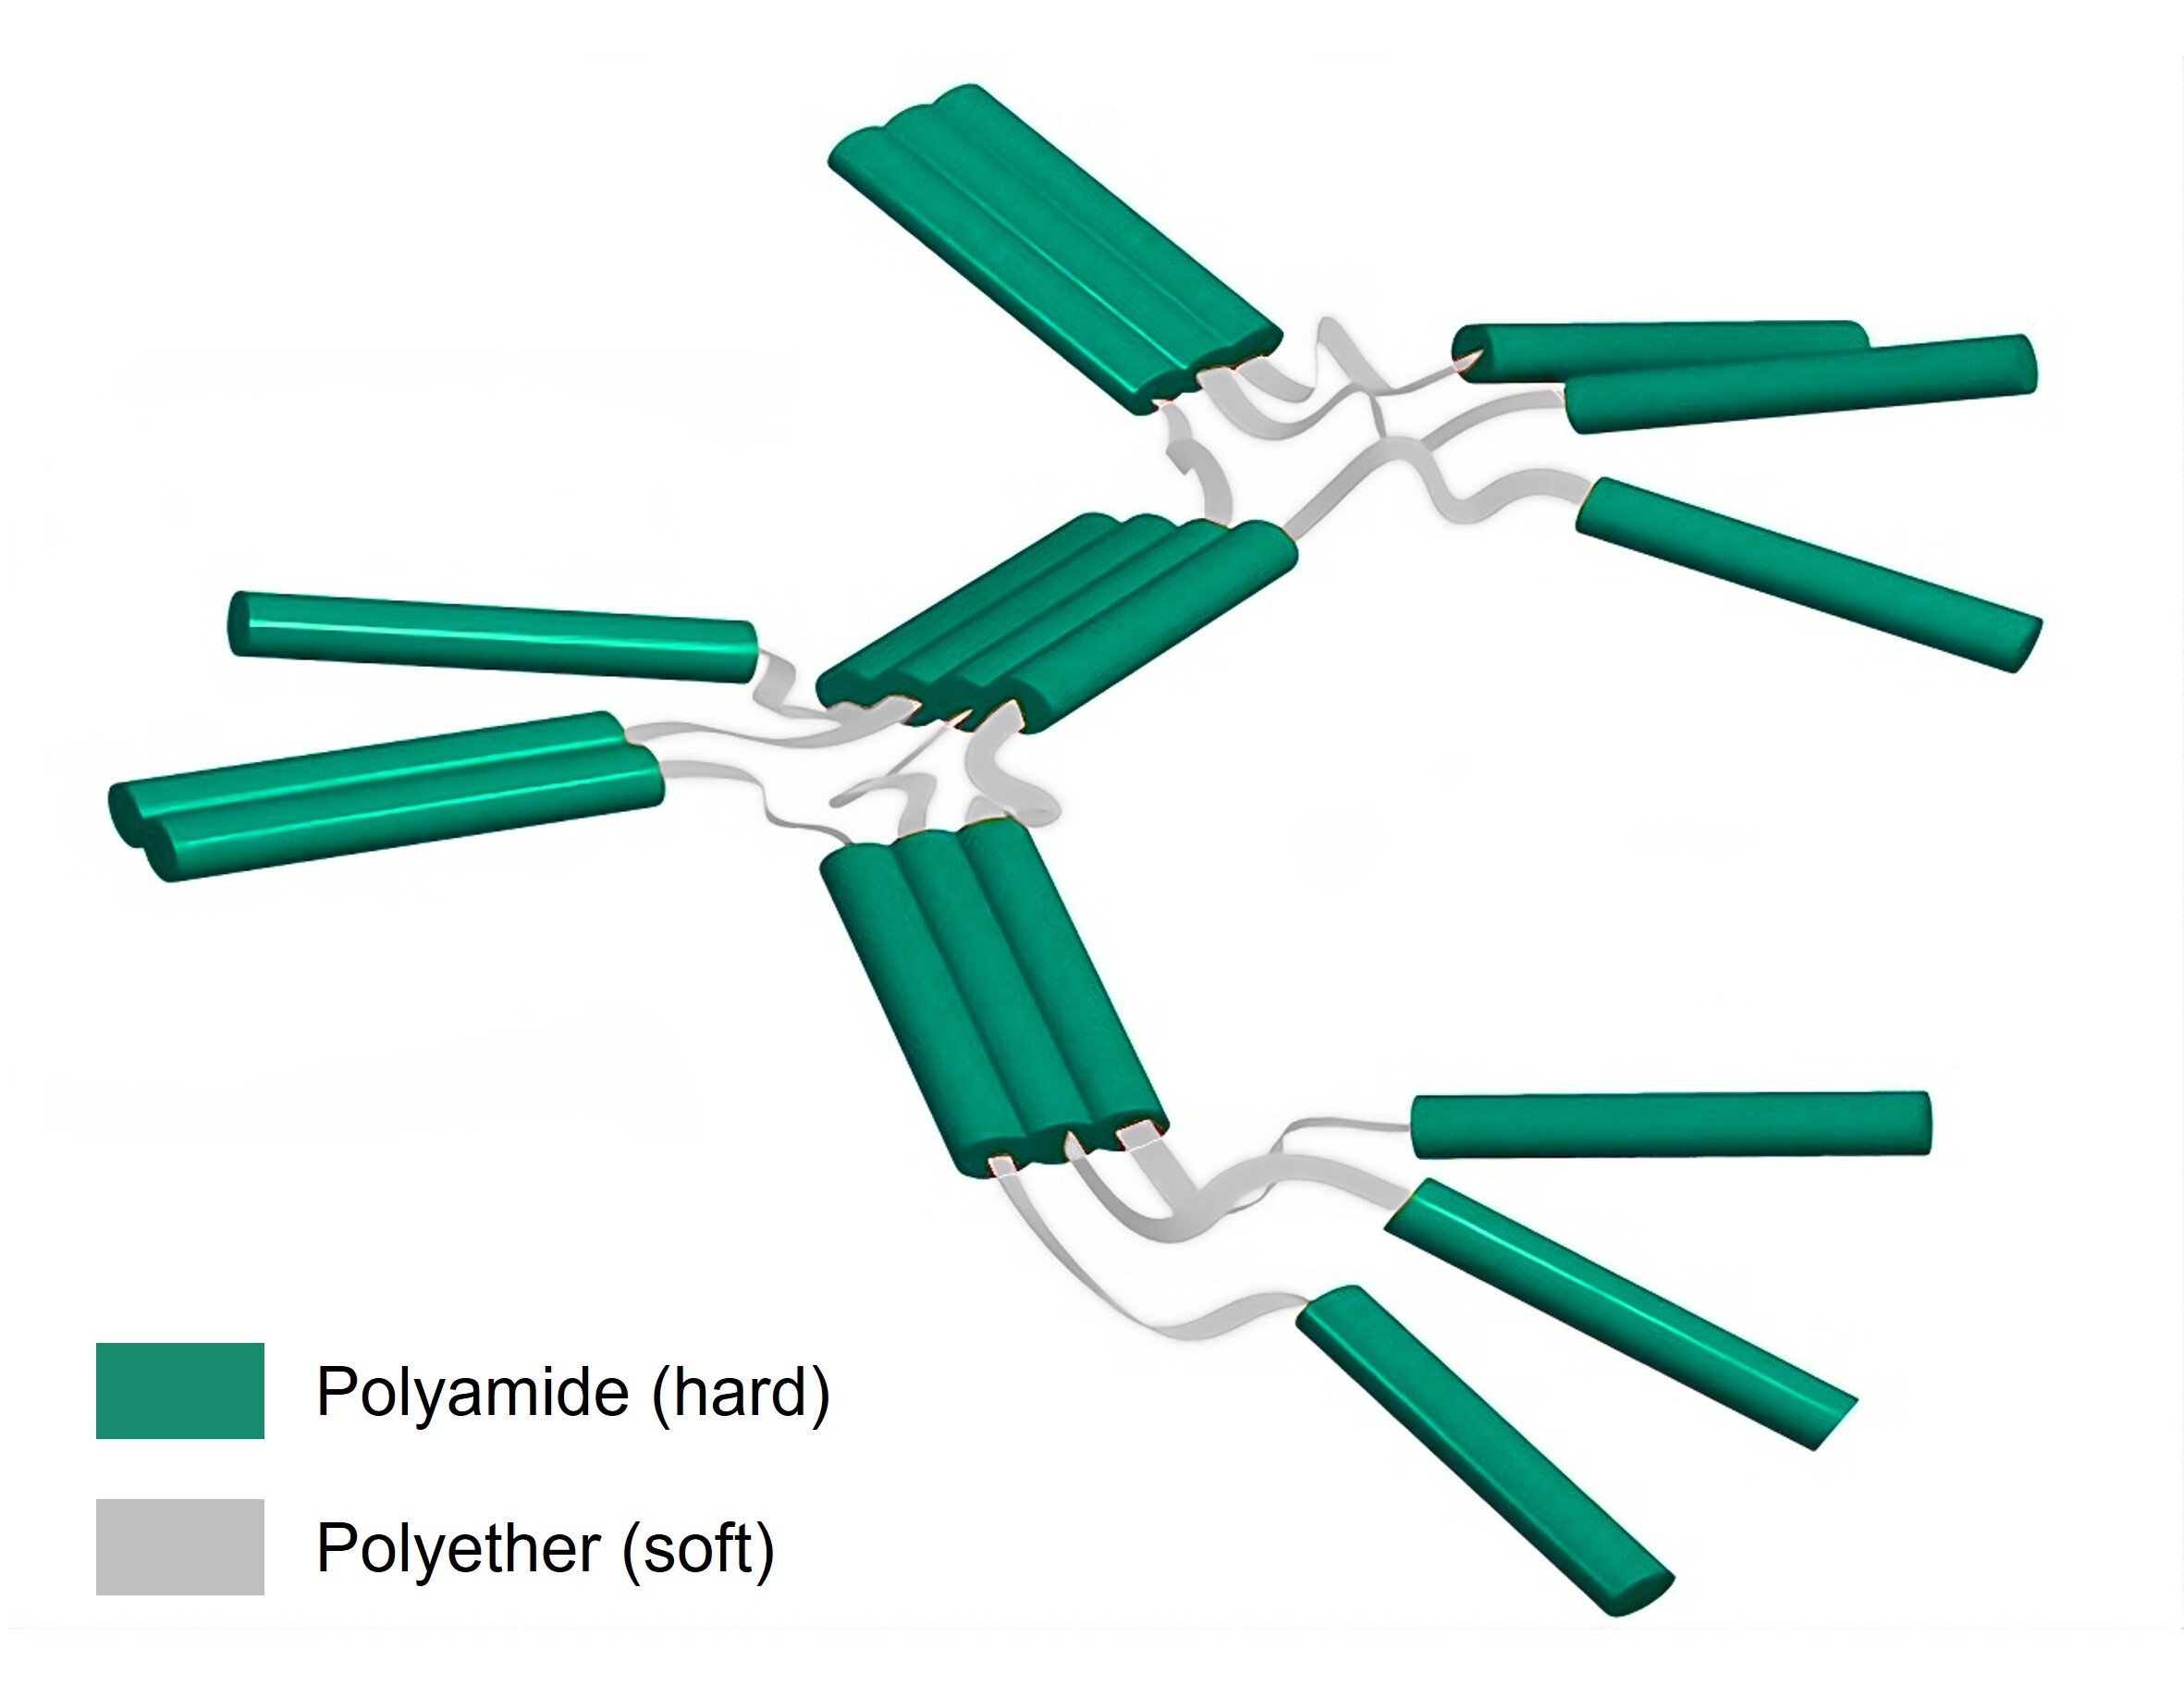 Chemical structure of Pebax thermoplastic elastomers with a hard poyamide phase and a soft polyether phase